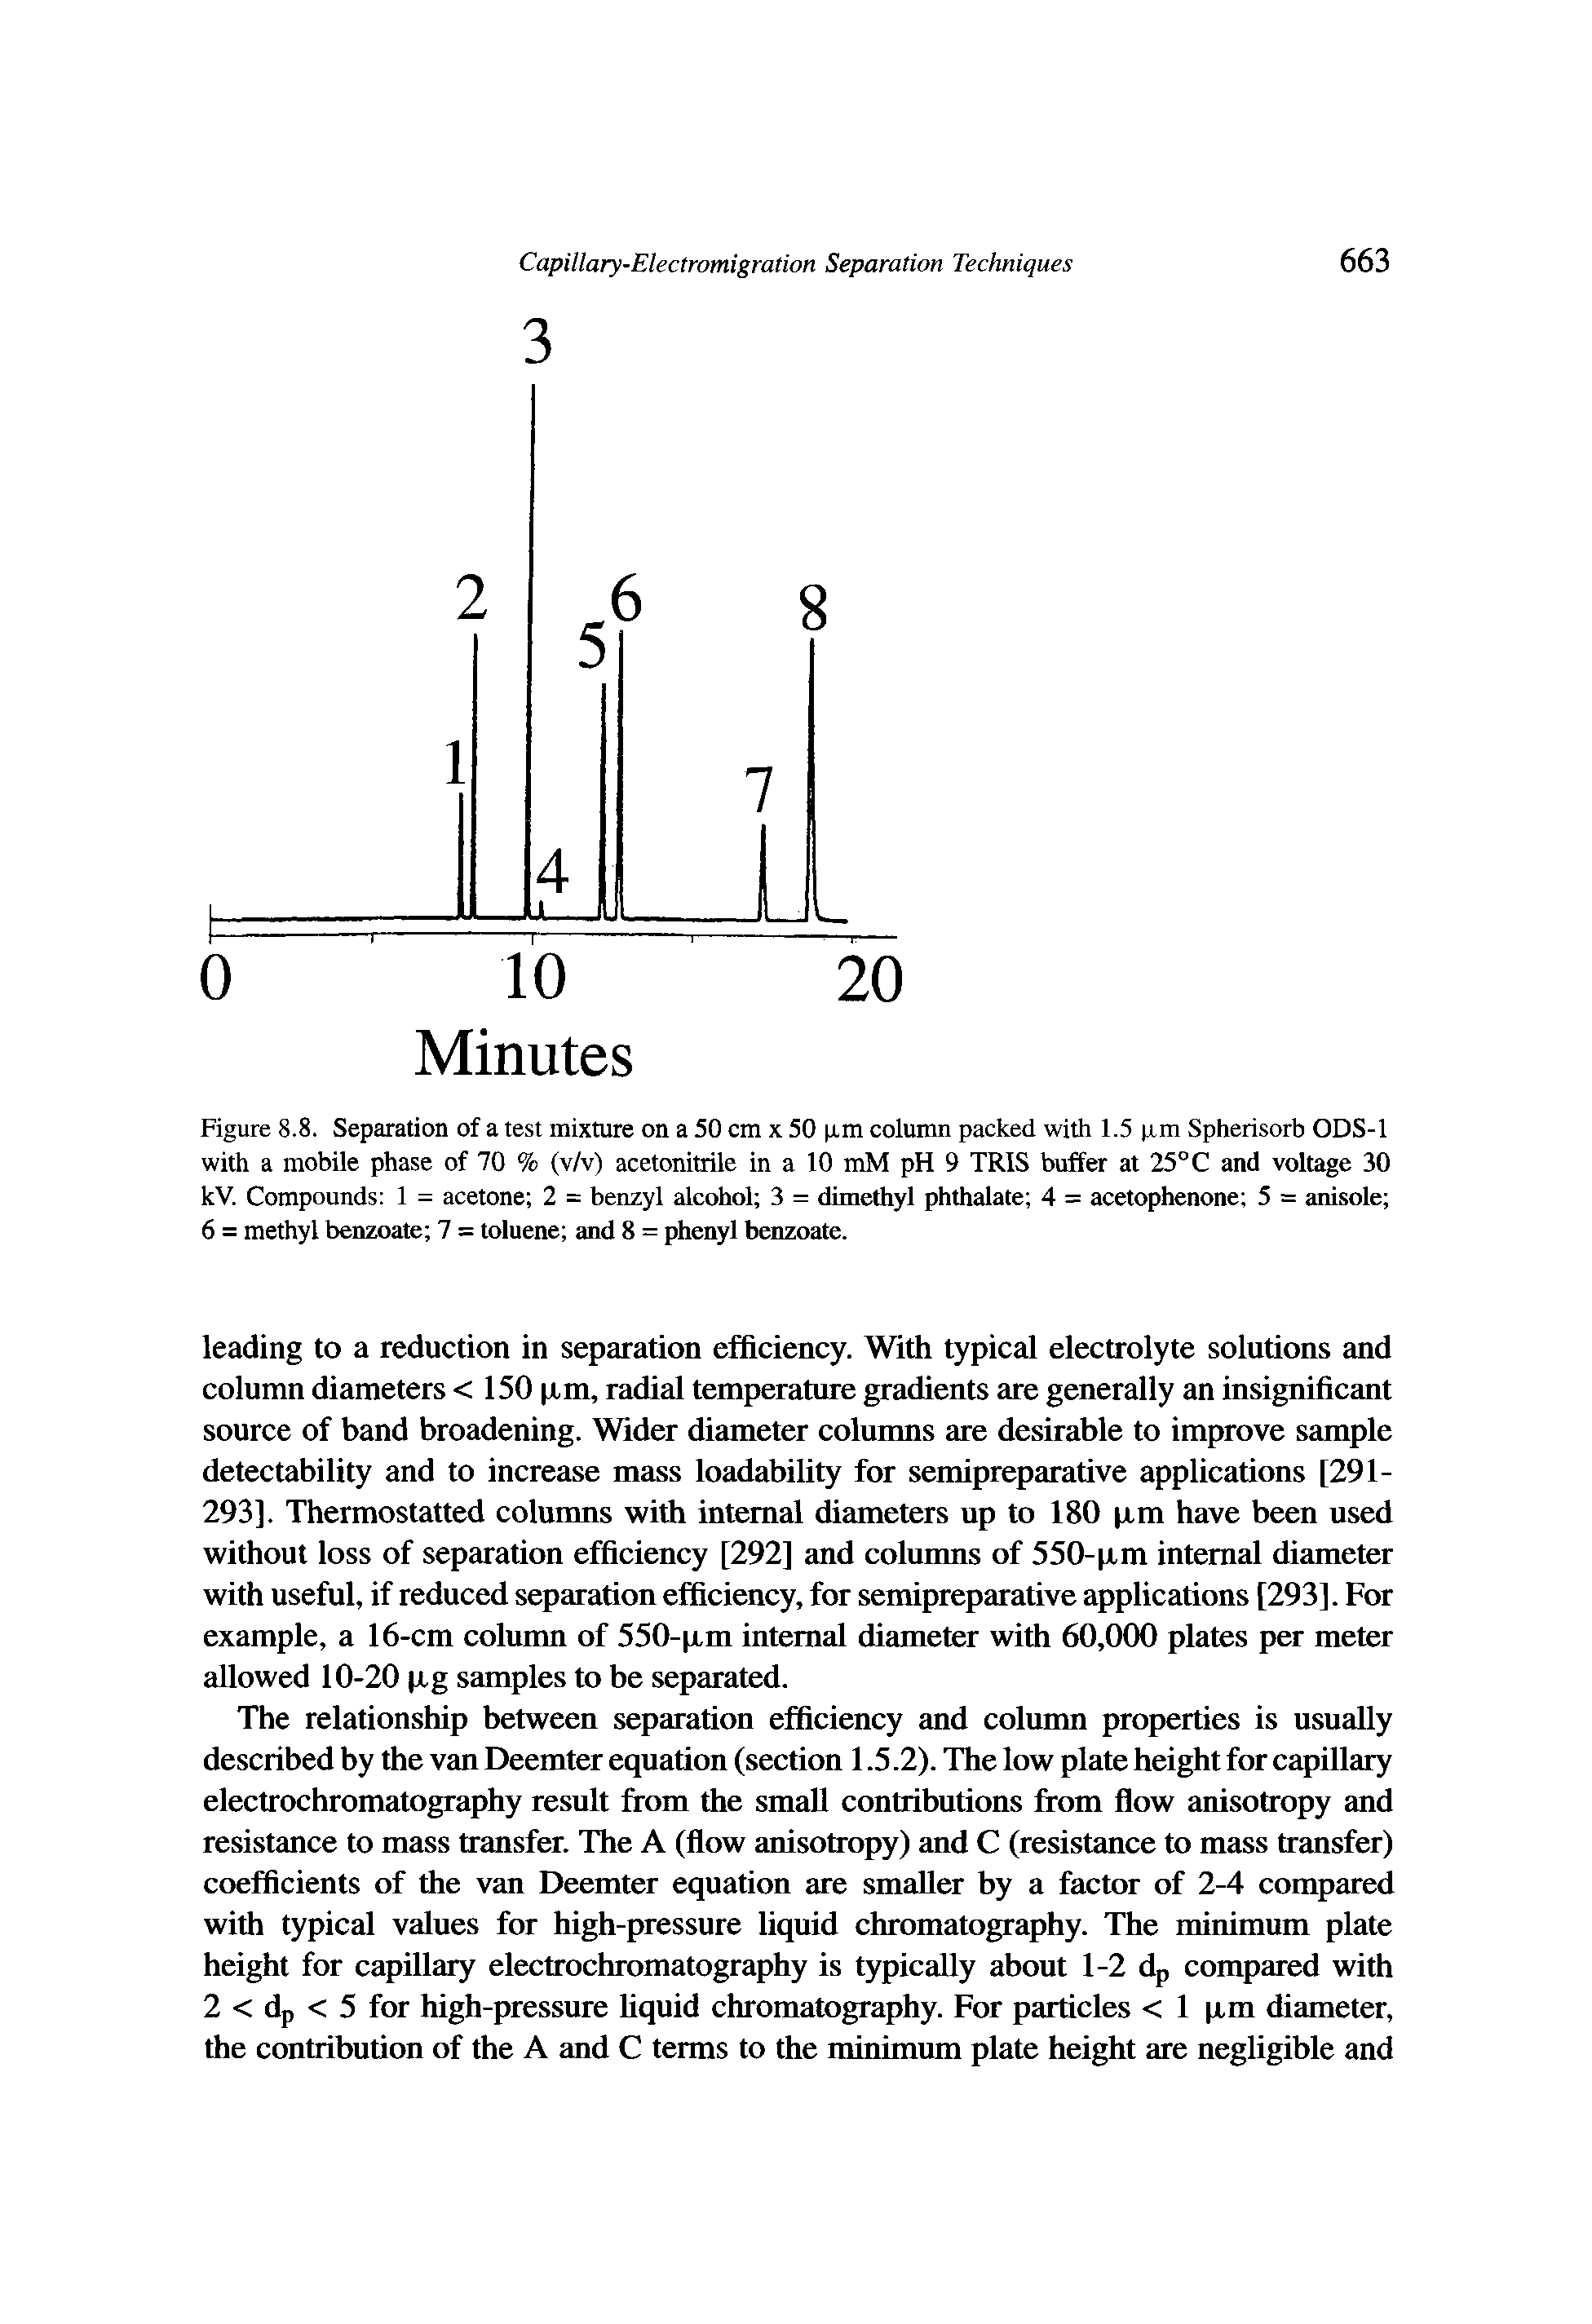 Figure 8.8. Separation of a test mixture on a 50 cm x 50 p.ni column packed with 1.5 )xm Spherisorb ODS-1 with a mobile phase of 70 % (v/v) acetonitrile in a 10 mM pH 9 TRIS buffer at 25° C and voltage 30 kV. Compounds 1 = acetone 2 = benzyl alcohol 3 = dimethyl phthalate 4 = acetophenone 5 = anisole 6 = methyl benzoate 7 = toluene and 8 = phenyl benzoate.